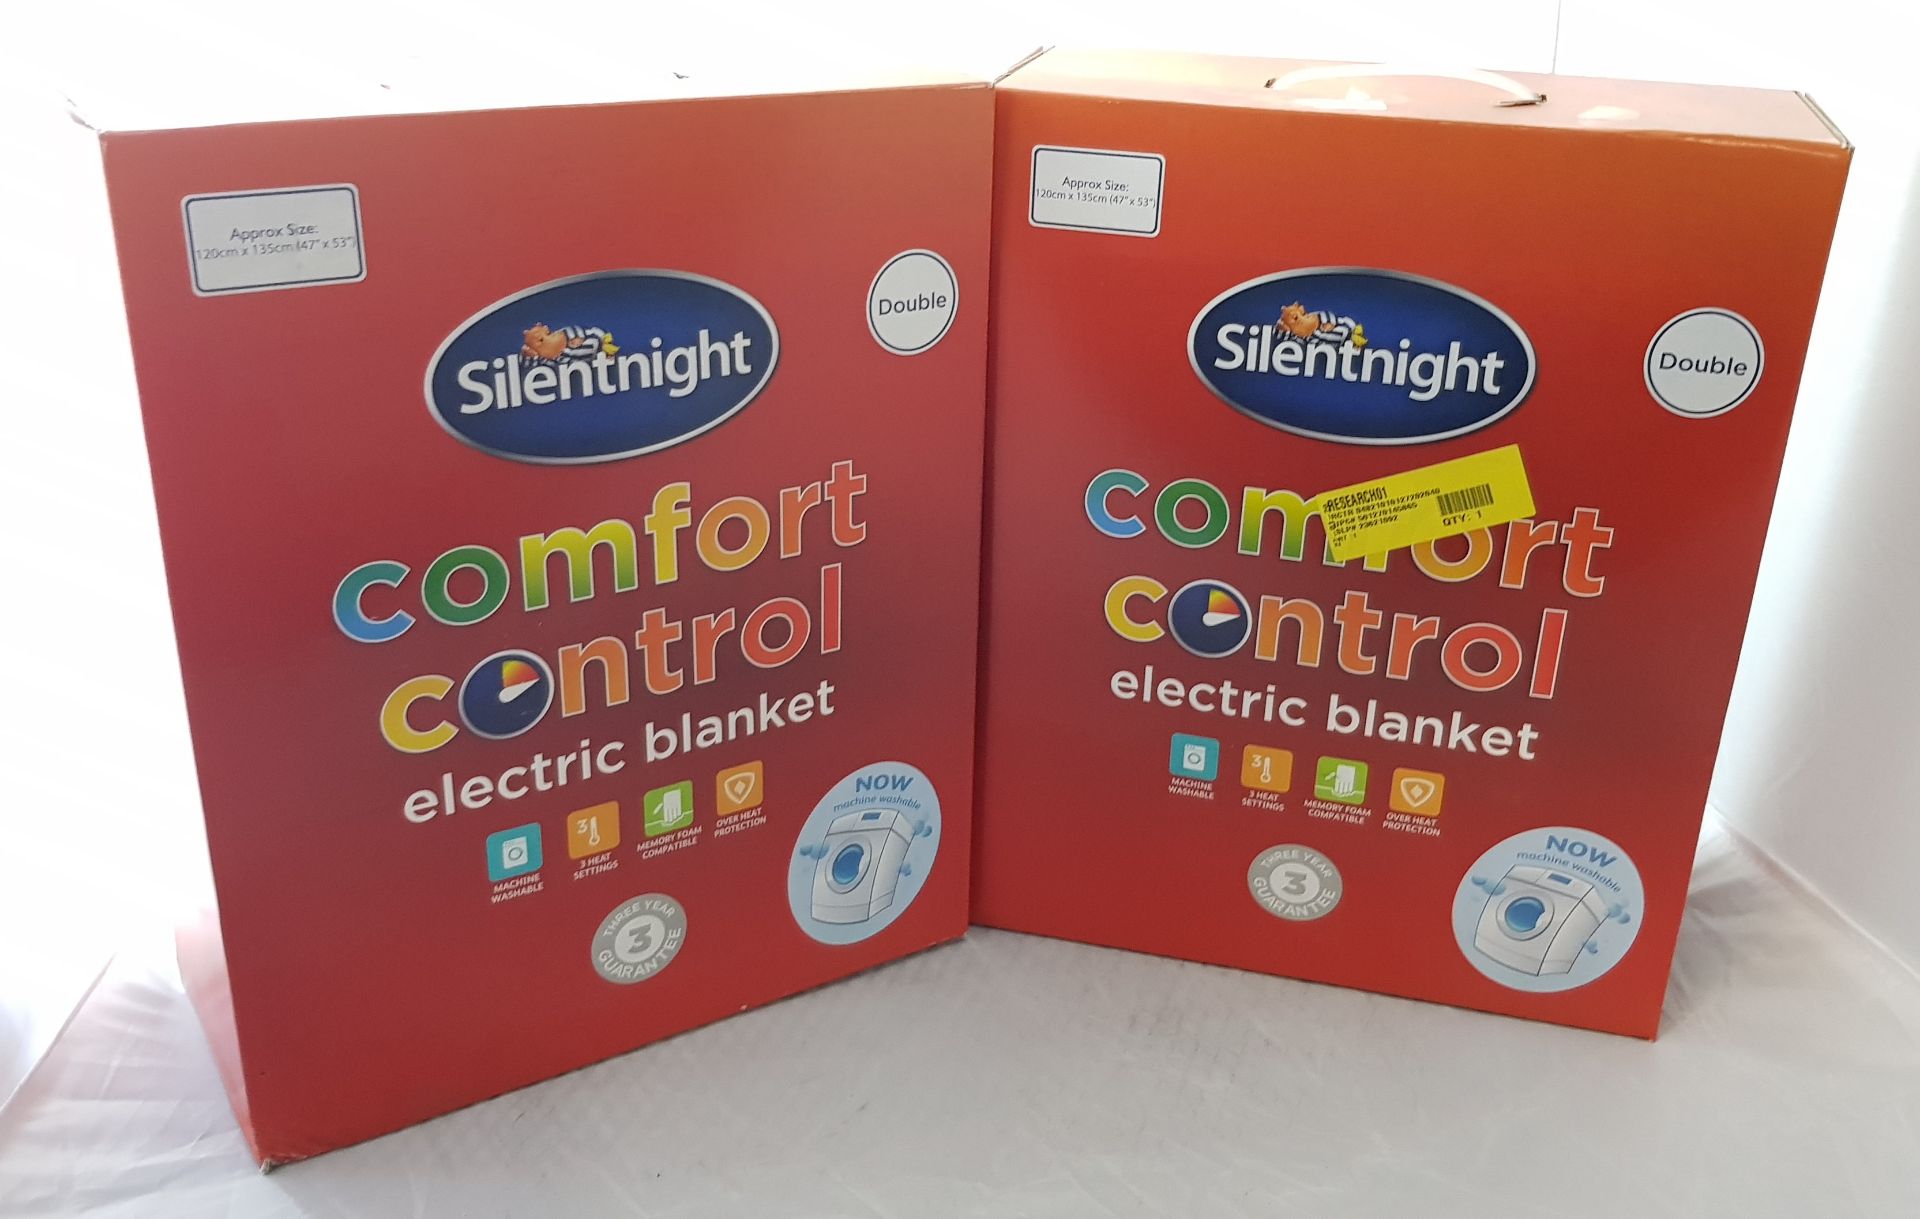 2 X Silentnight Double Comfort Control Electric Blanket. New, Sealed Product. No Guarantee Or W... - Image 2 of 2